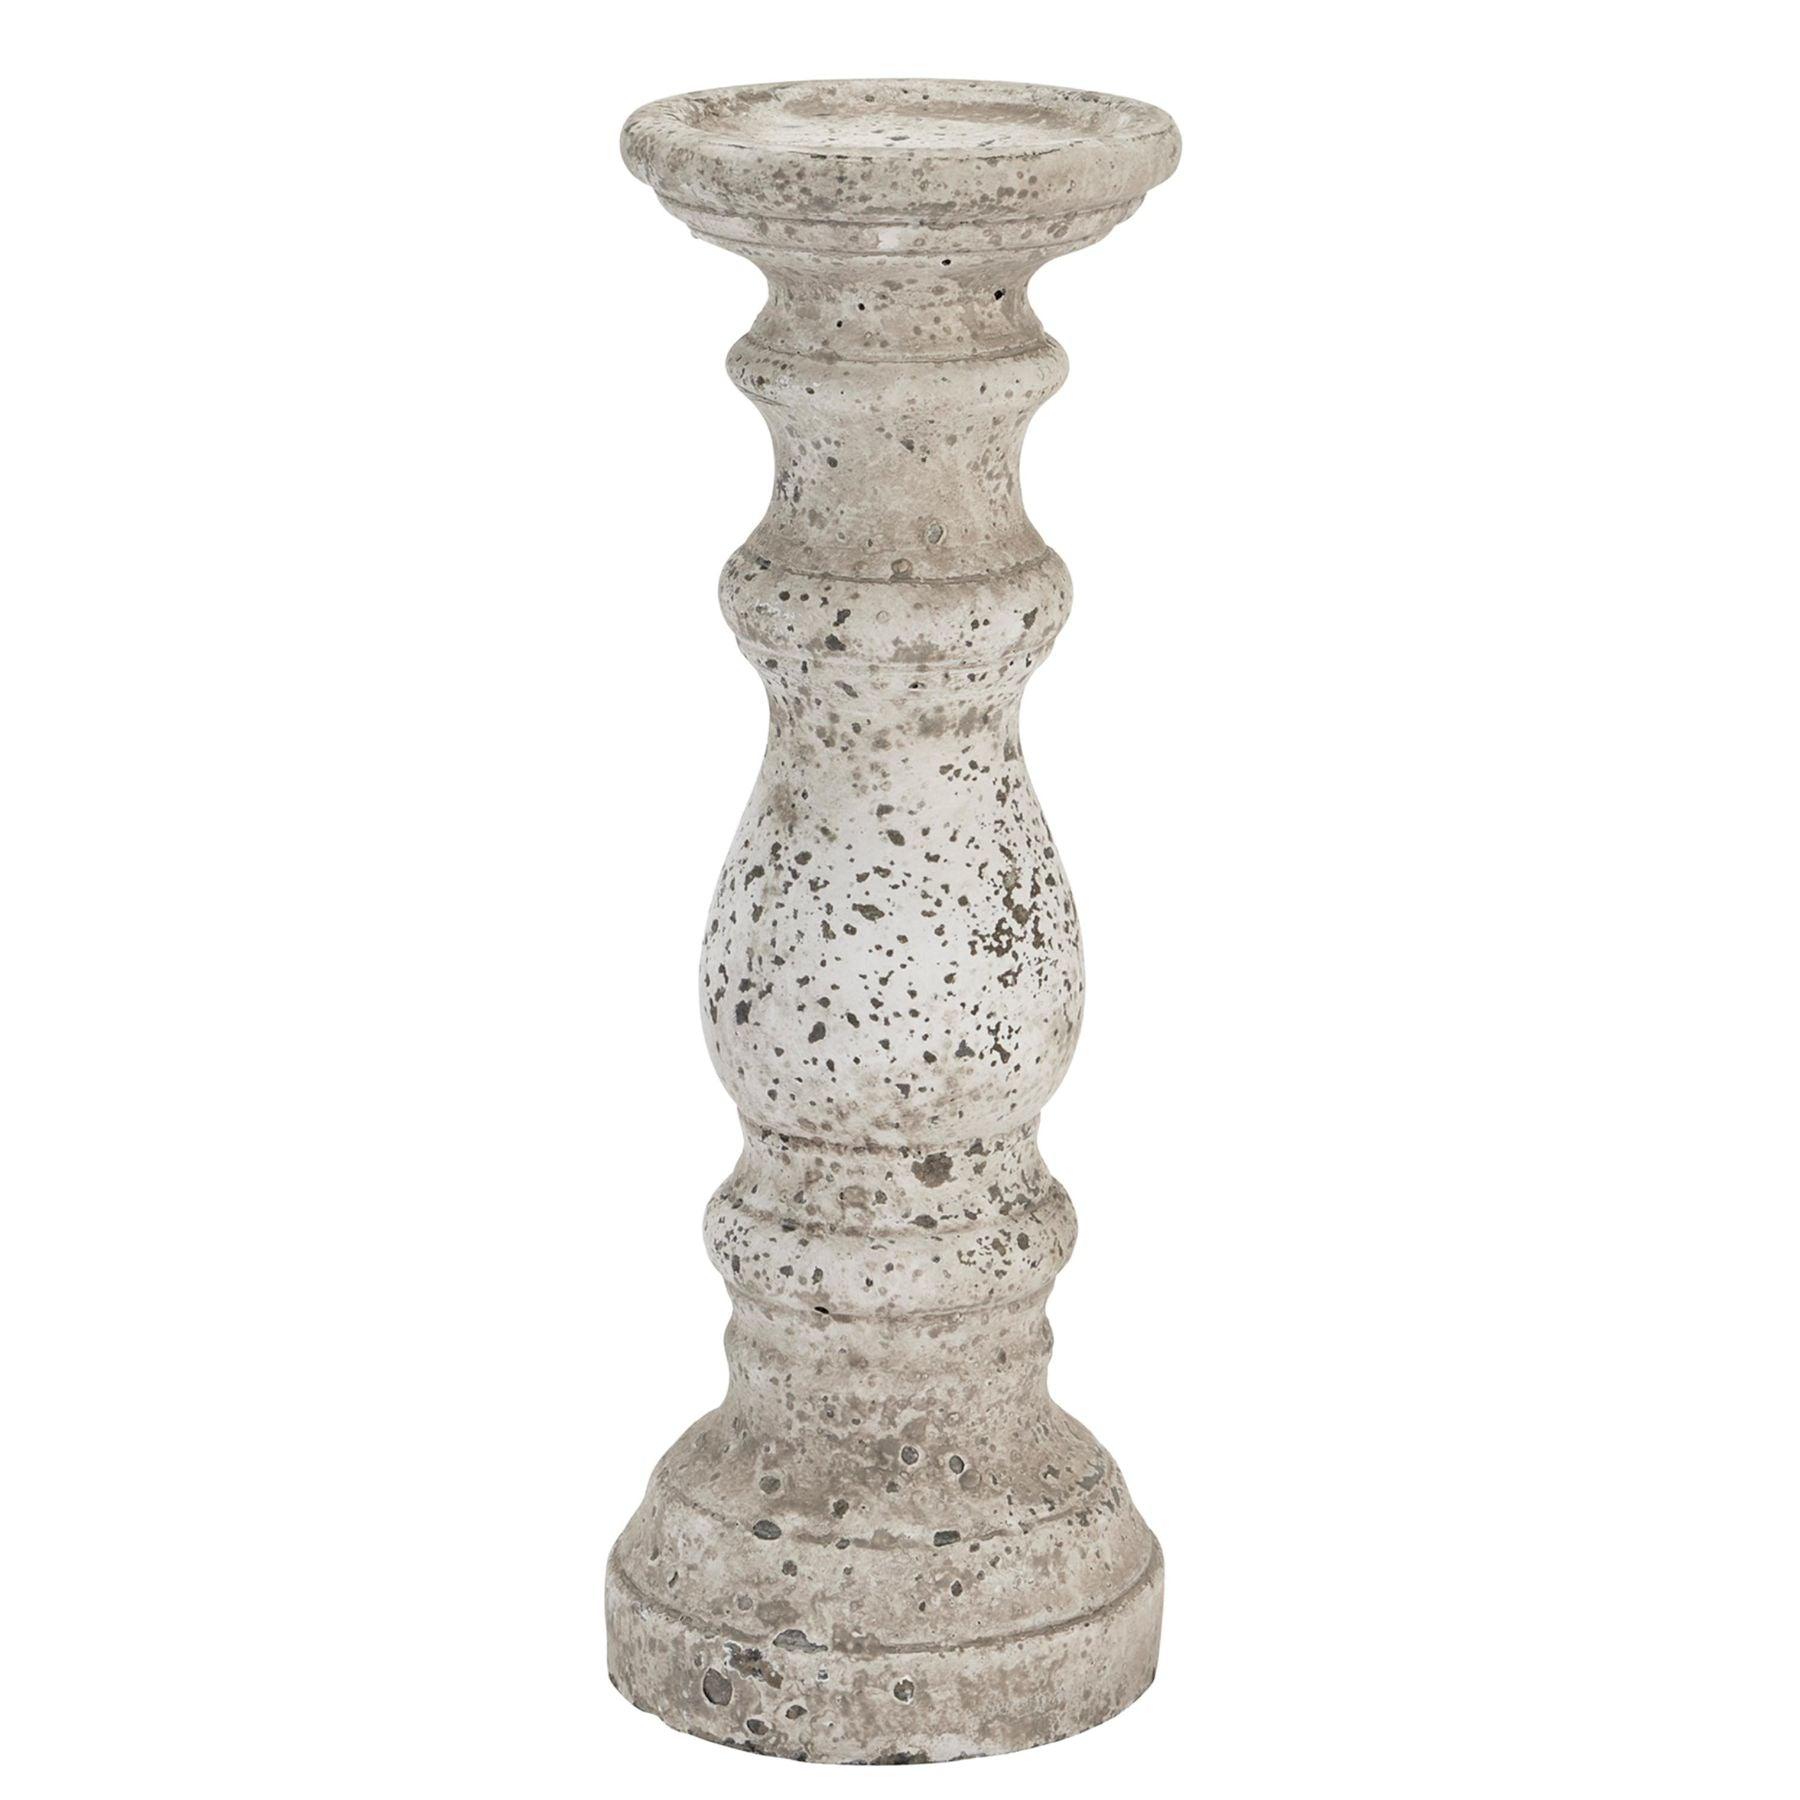 View Large Stone Ceramic Column Candle Holder information